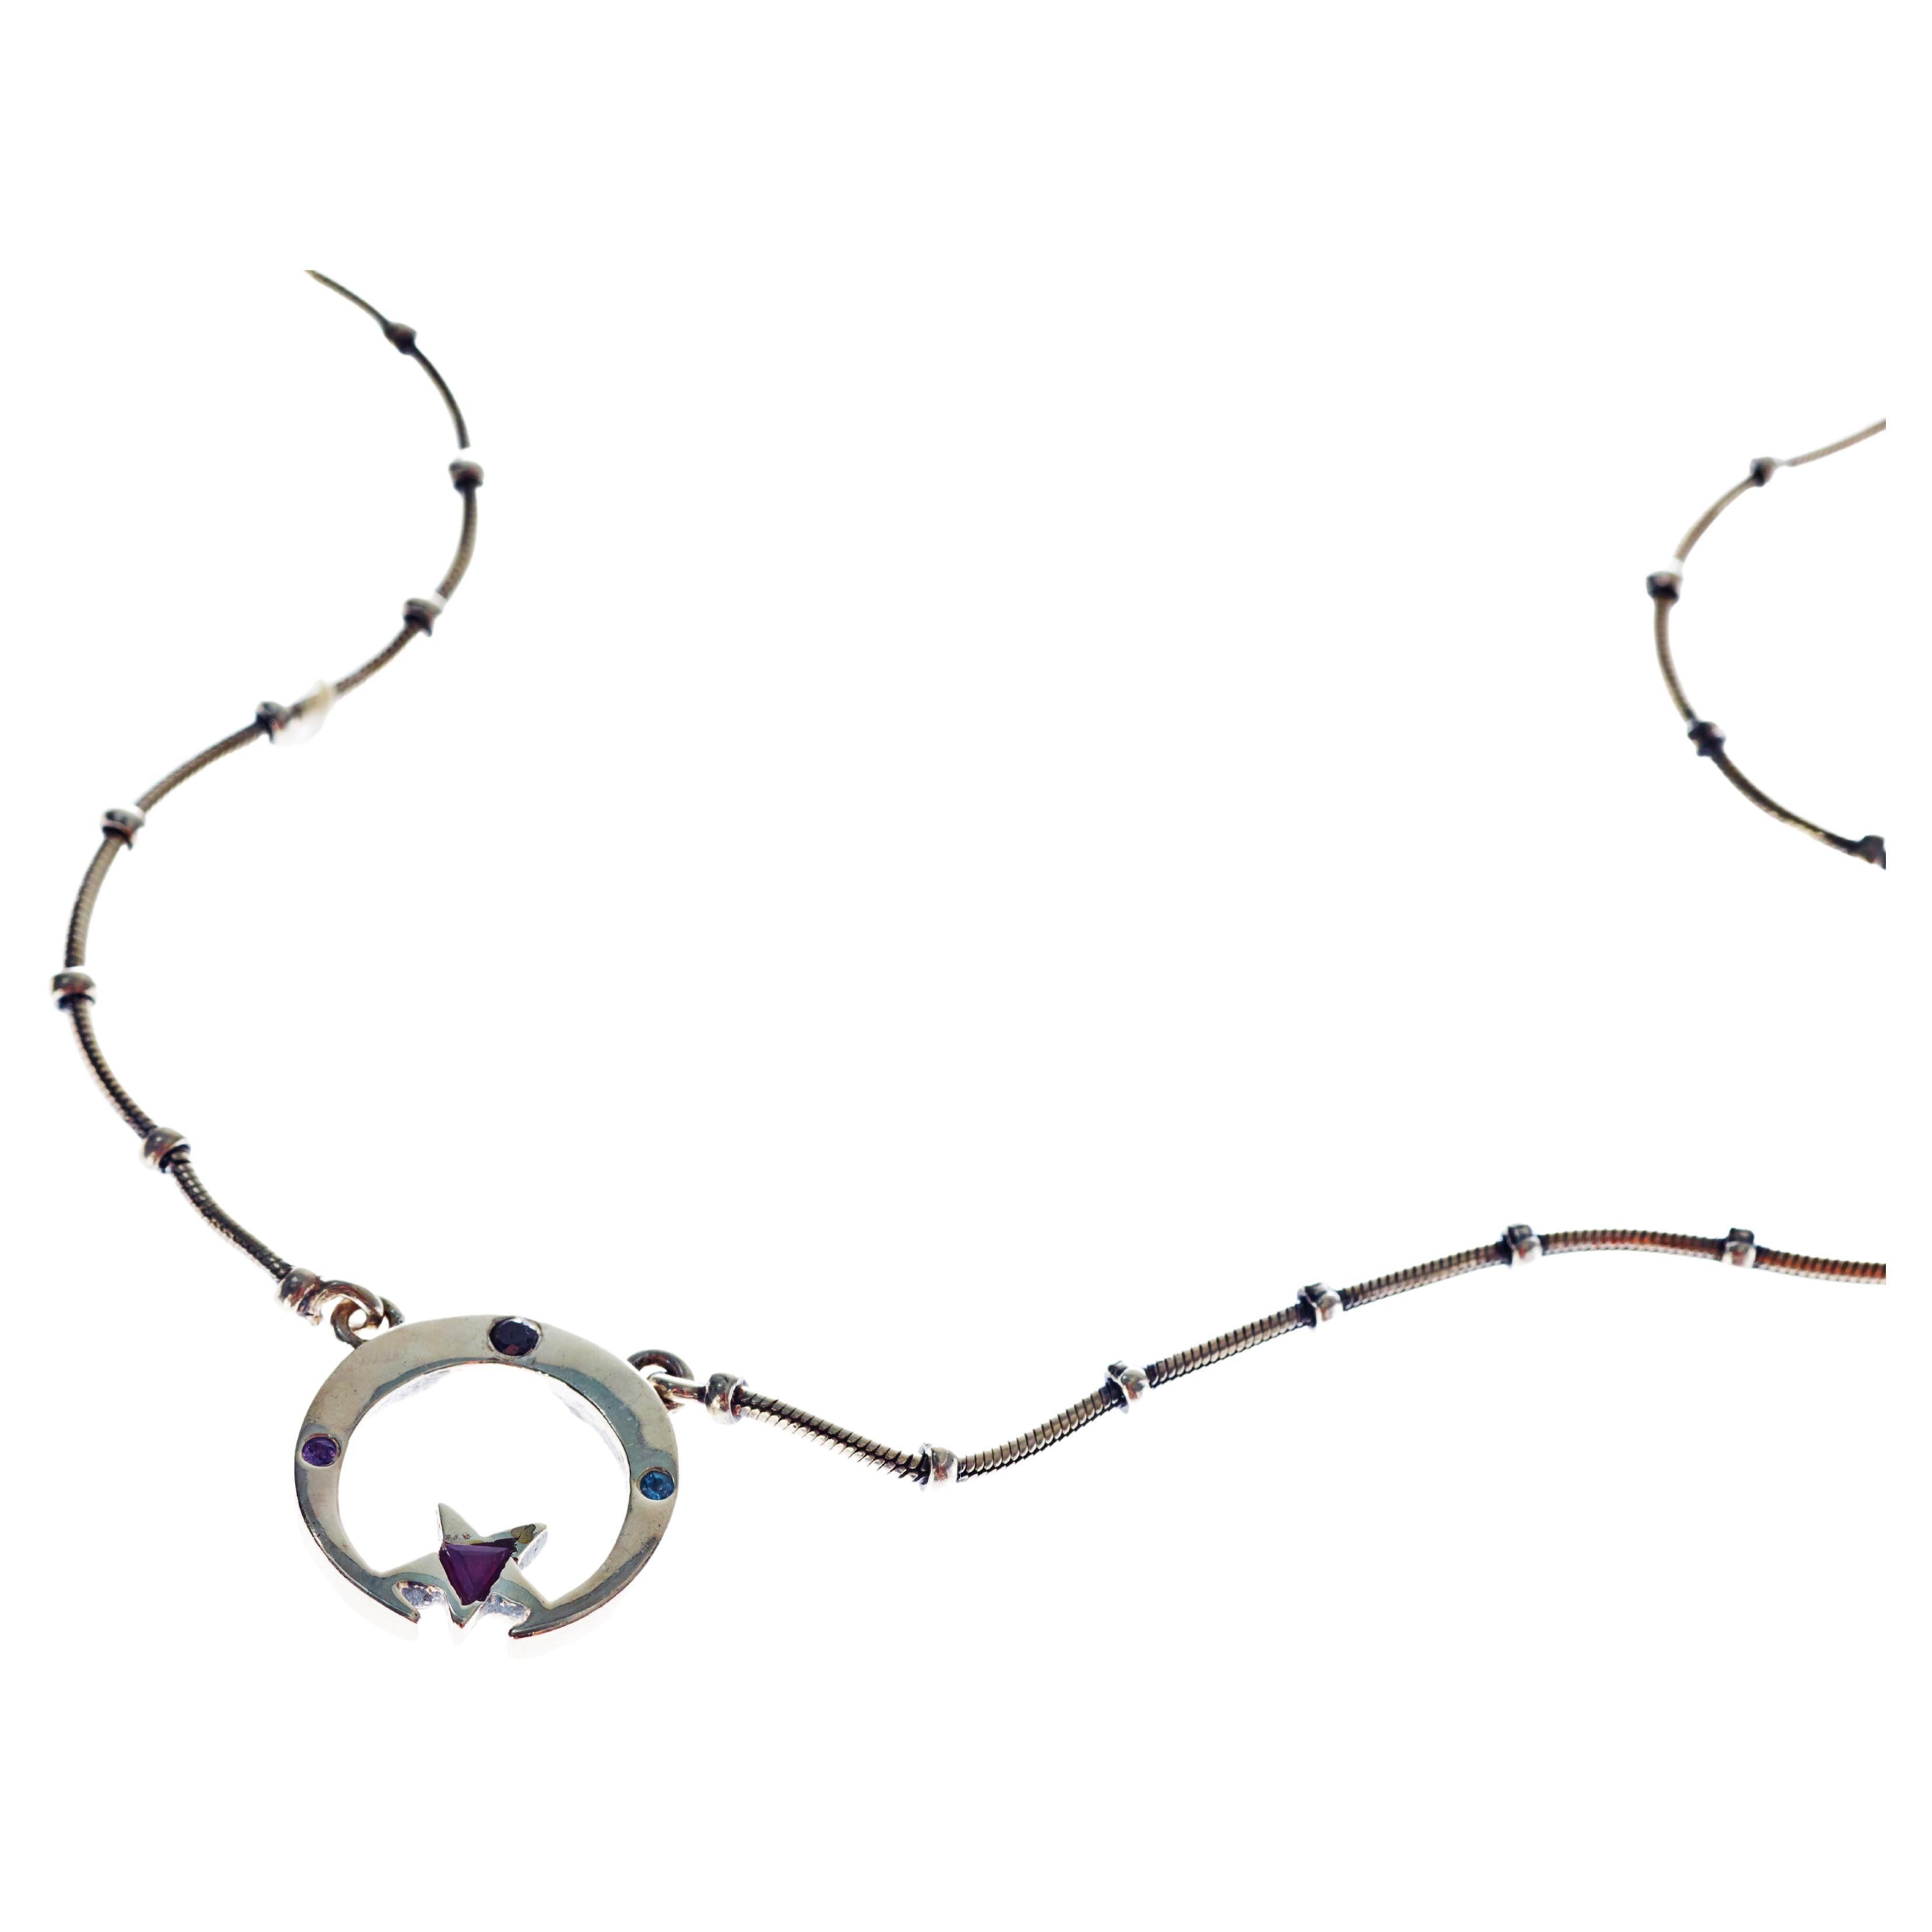 star in circle necklace meaning